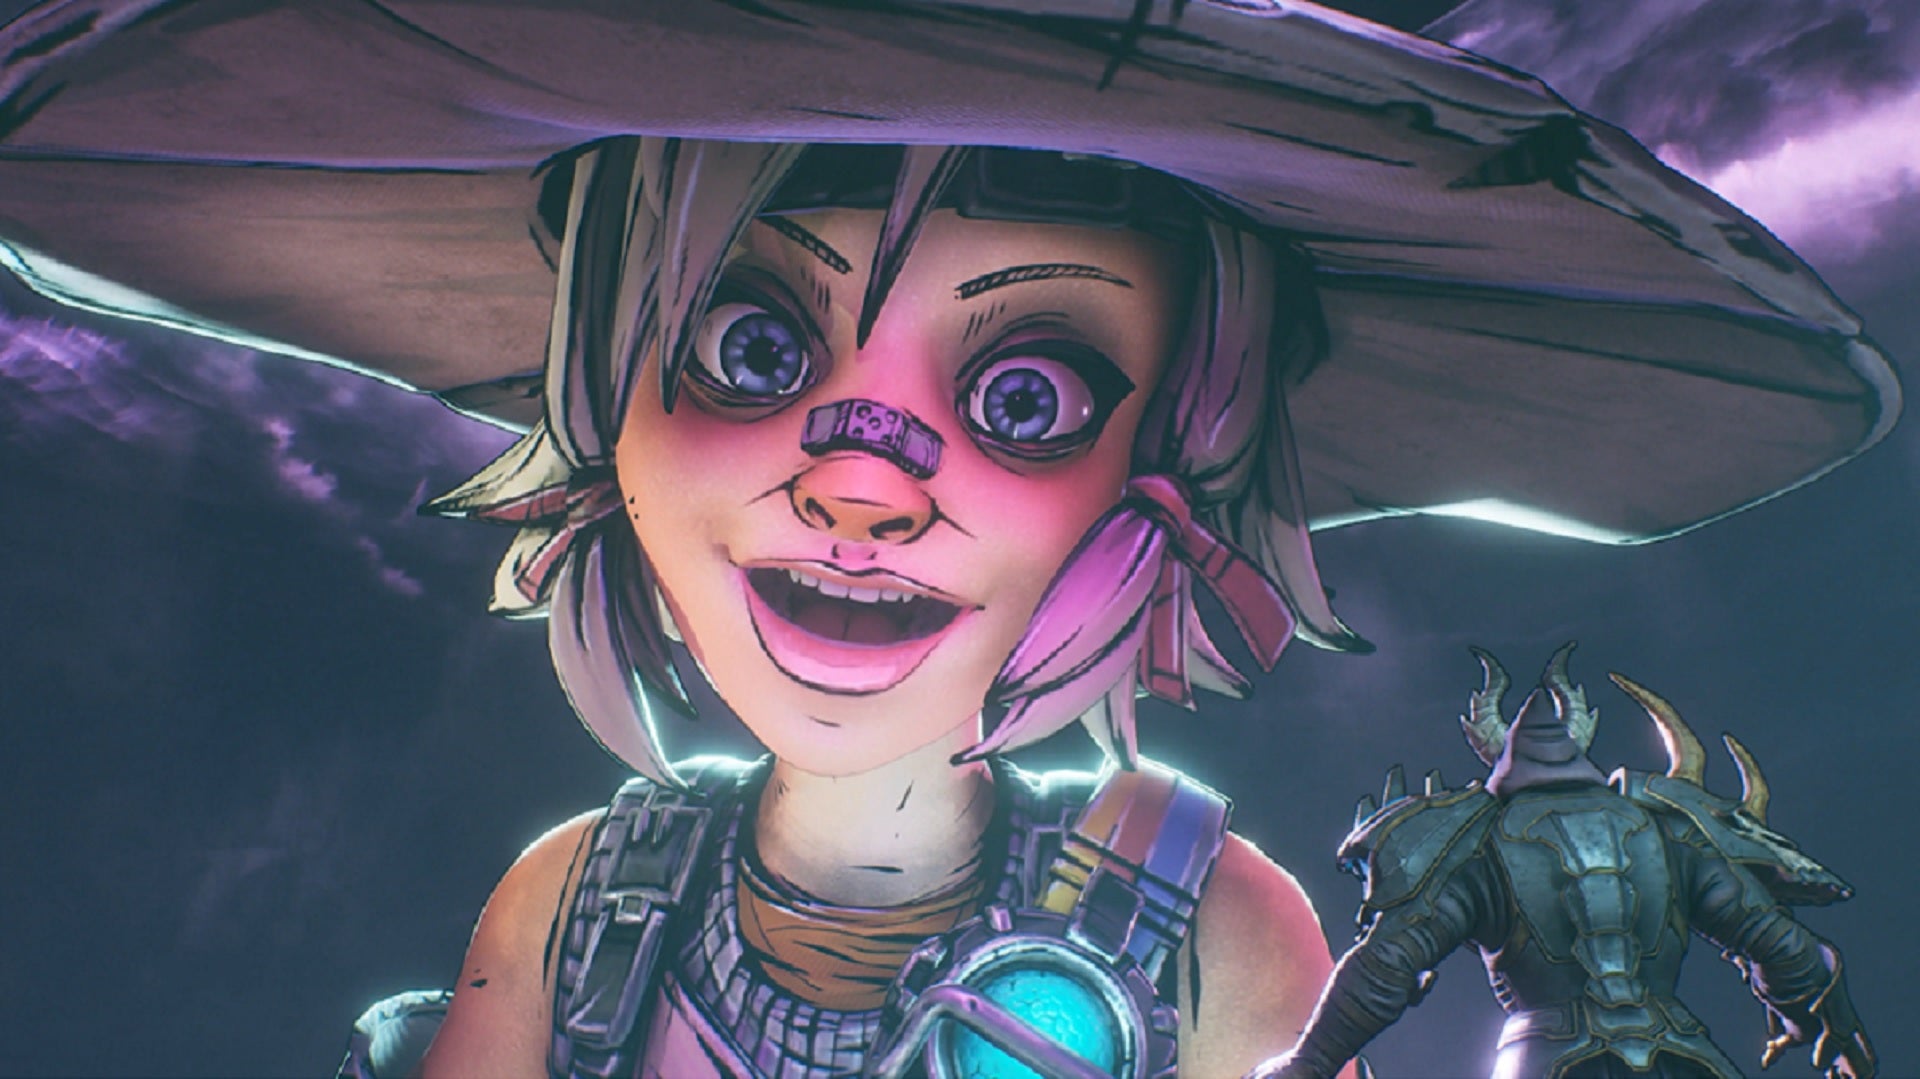 Image for Roll for initiative - here's what critics think of Tiny Tina's Wonderlands